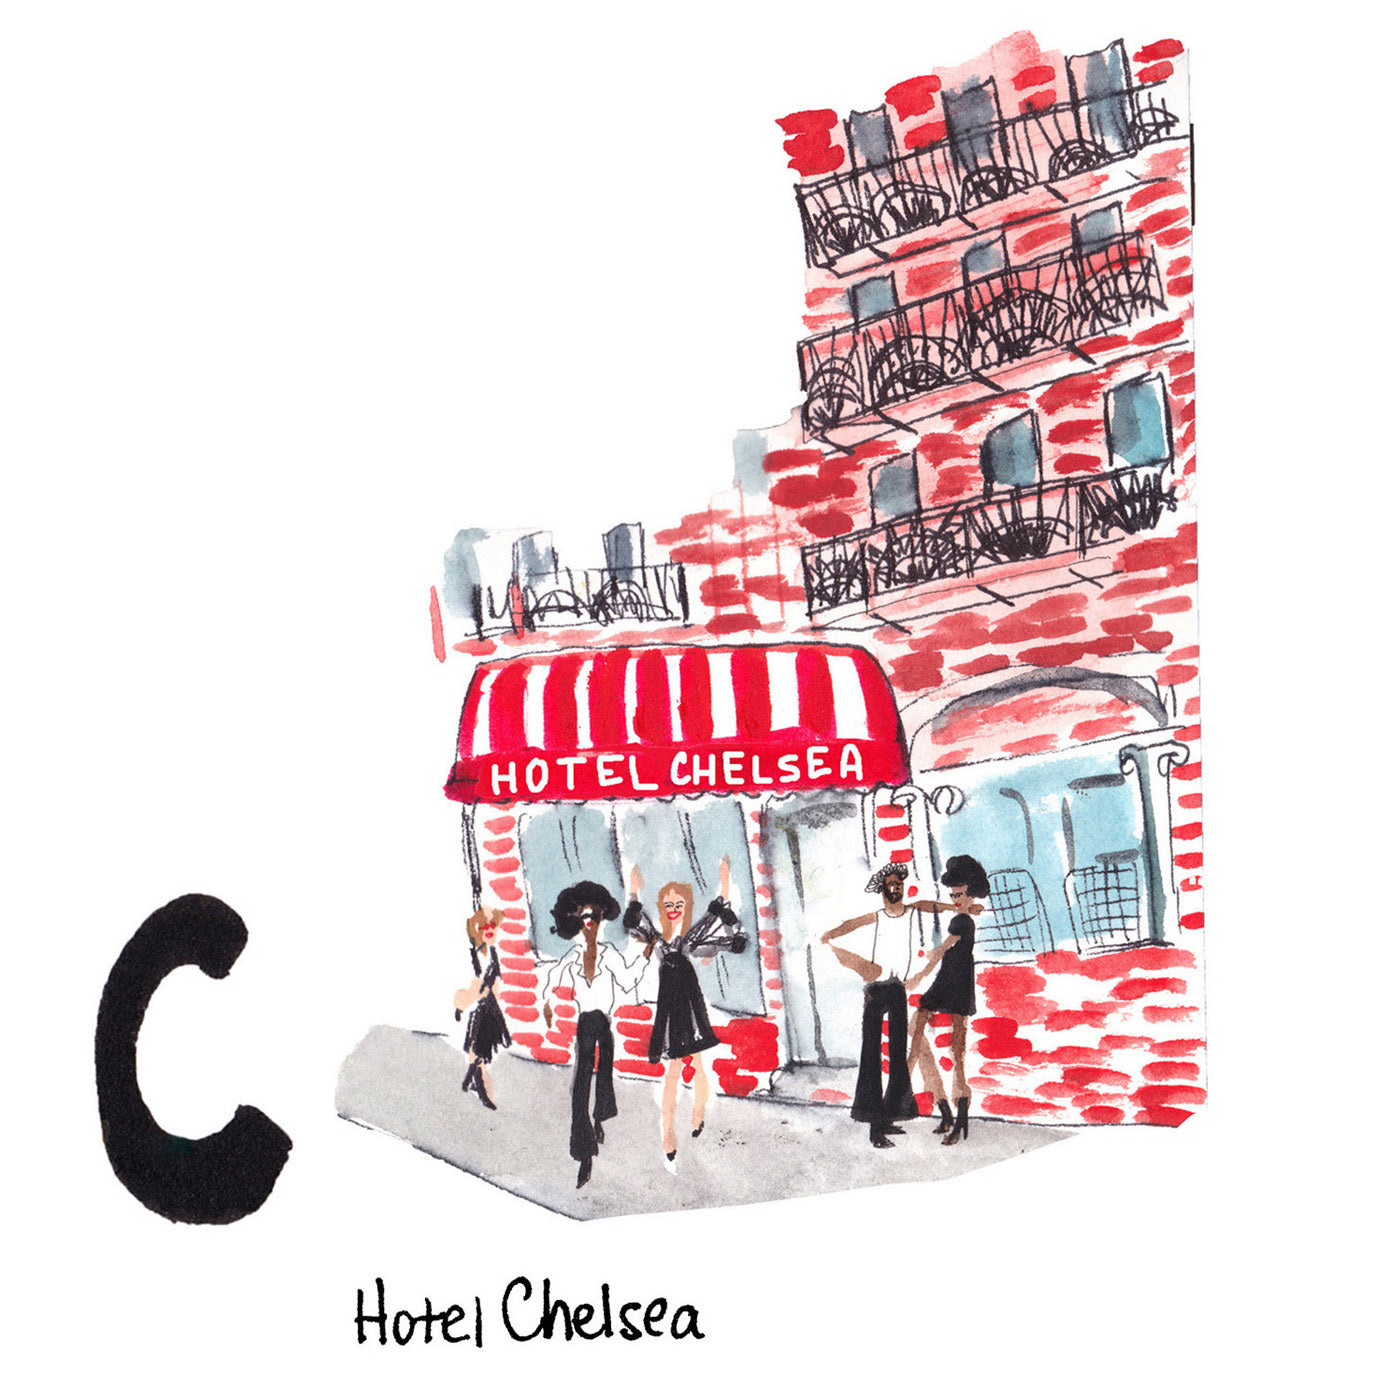 C is for Hotel Chelsea. The Hotel Chelsea is an iconic Chelsea landmark. It has been called home by famous writers, artists and musicians over many decades. Leonard Cohen wrote the song “Chelsea Hotel No 2” in 1974, vibrantly describing the creative, art fueled bohemian lifestyle of 1970s New York City.